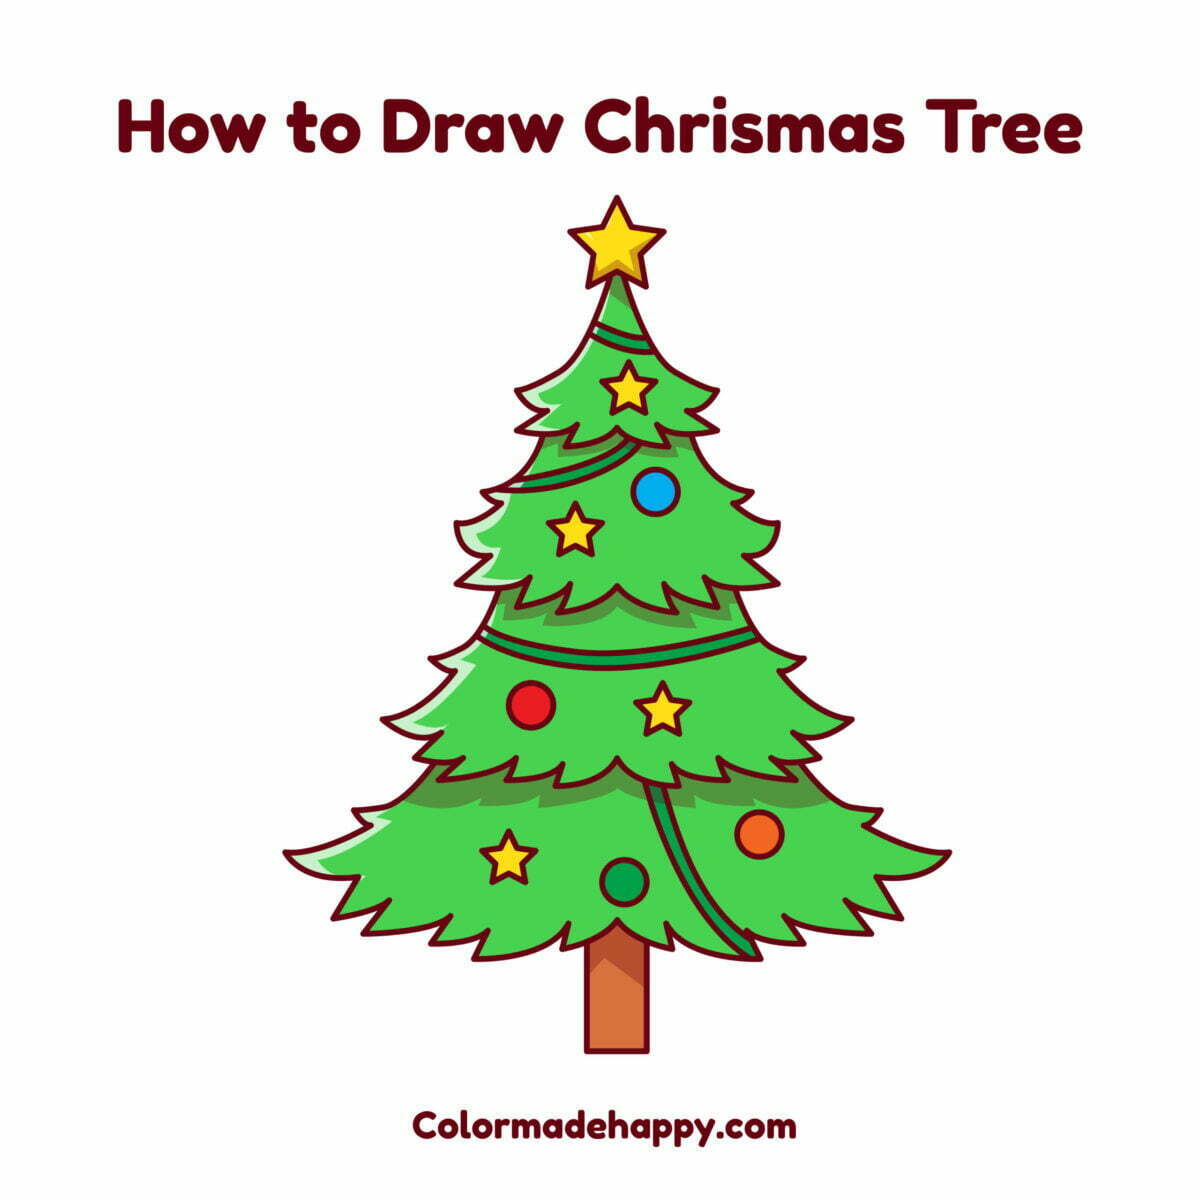 How to draw a christmas tree step by step for beginners-anthinhphatland.vn